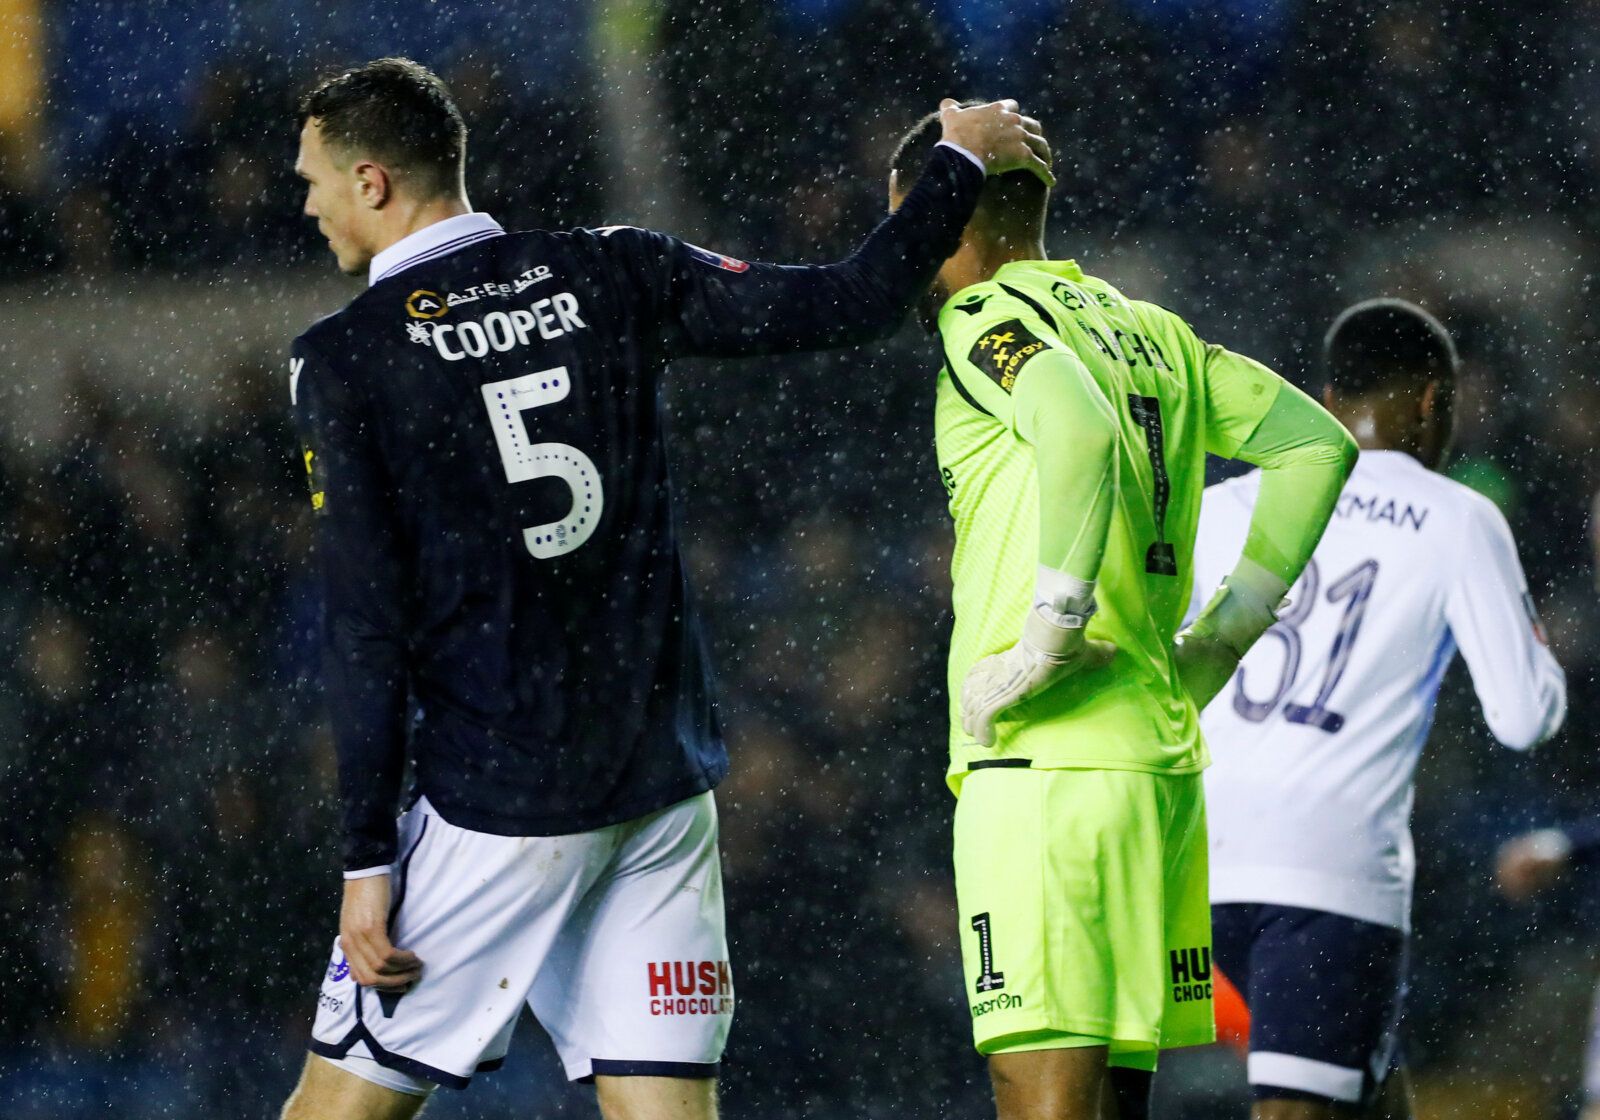 Soccer Football - FA Cup Fourth Round - Millwall v Everton  - The Den, London, Britain - January 26, 2019   Millwall's Jake Cooper with Jordan Archer during the match      REUTERS/Eddie Keogh